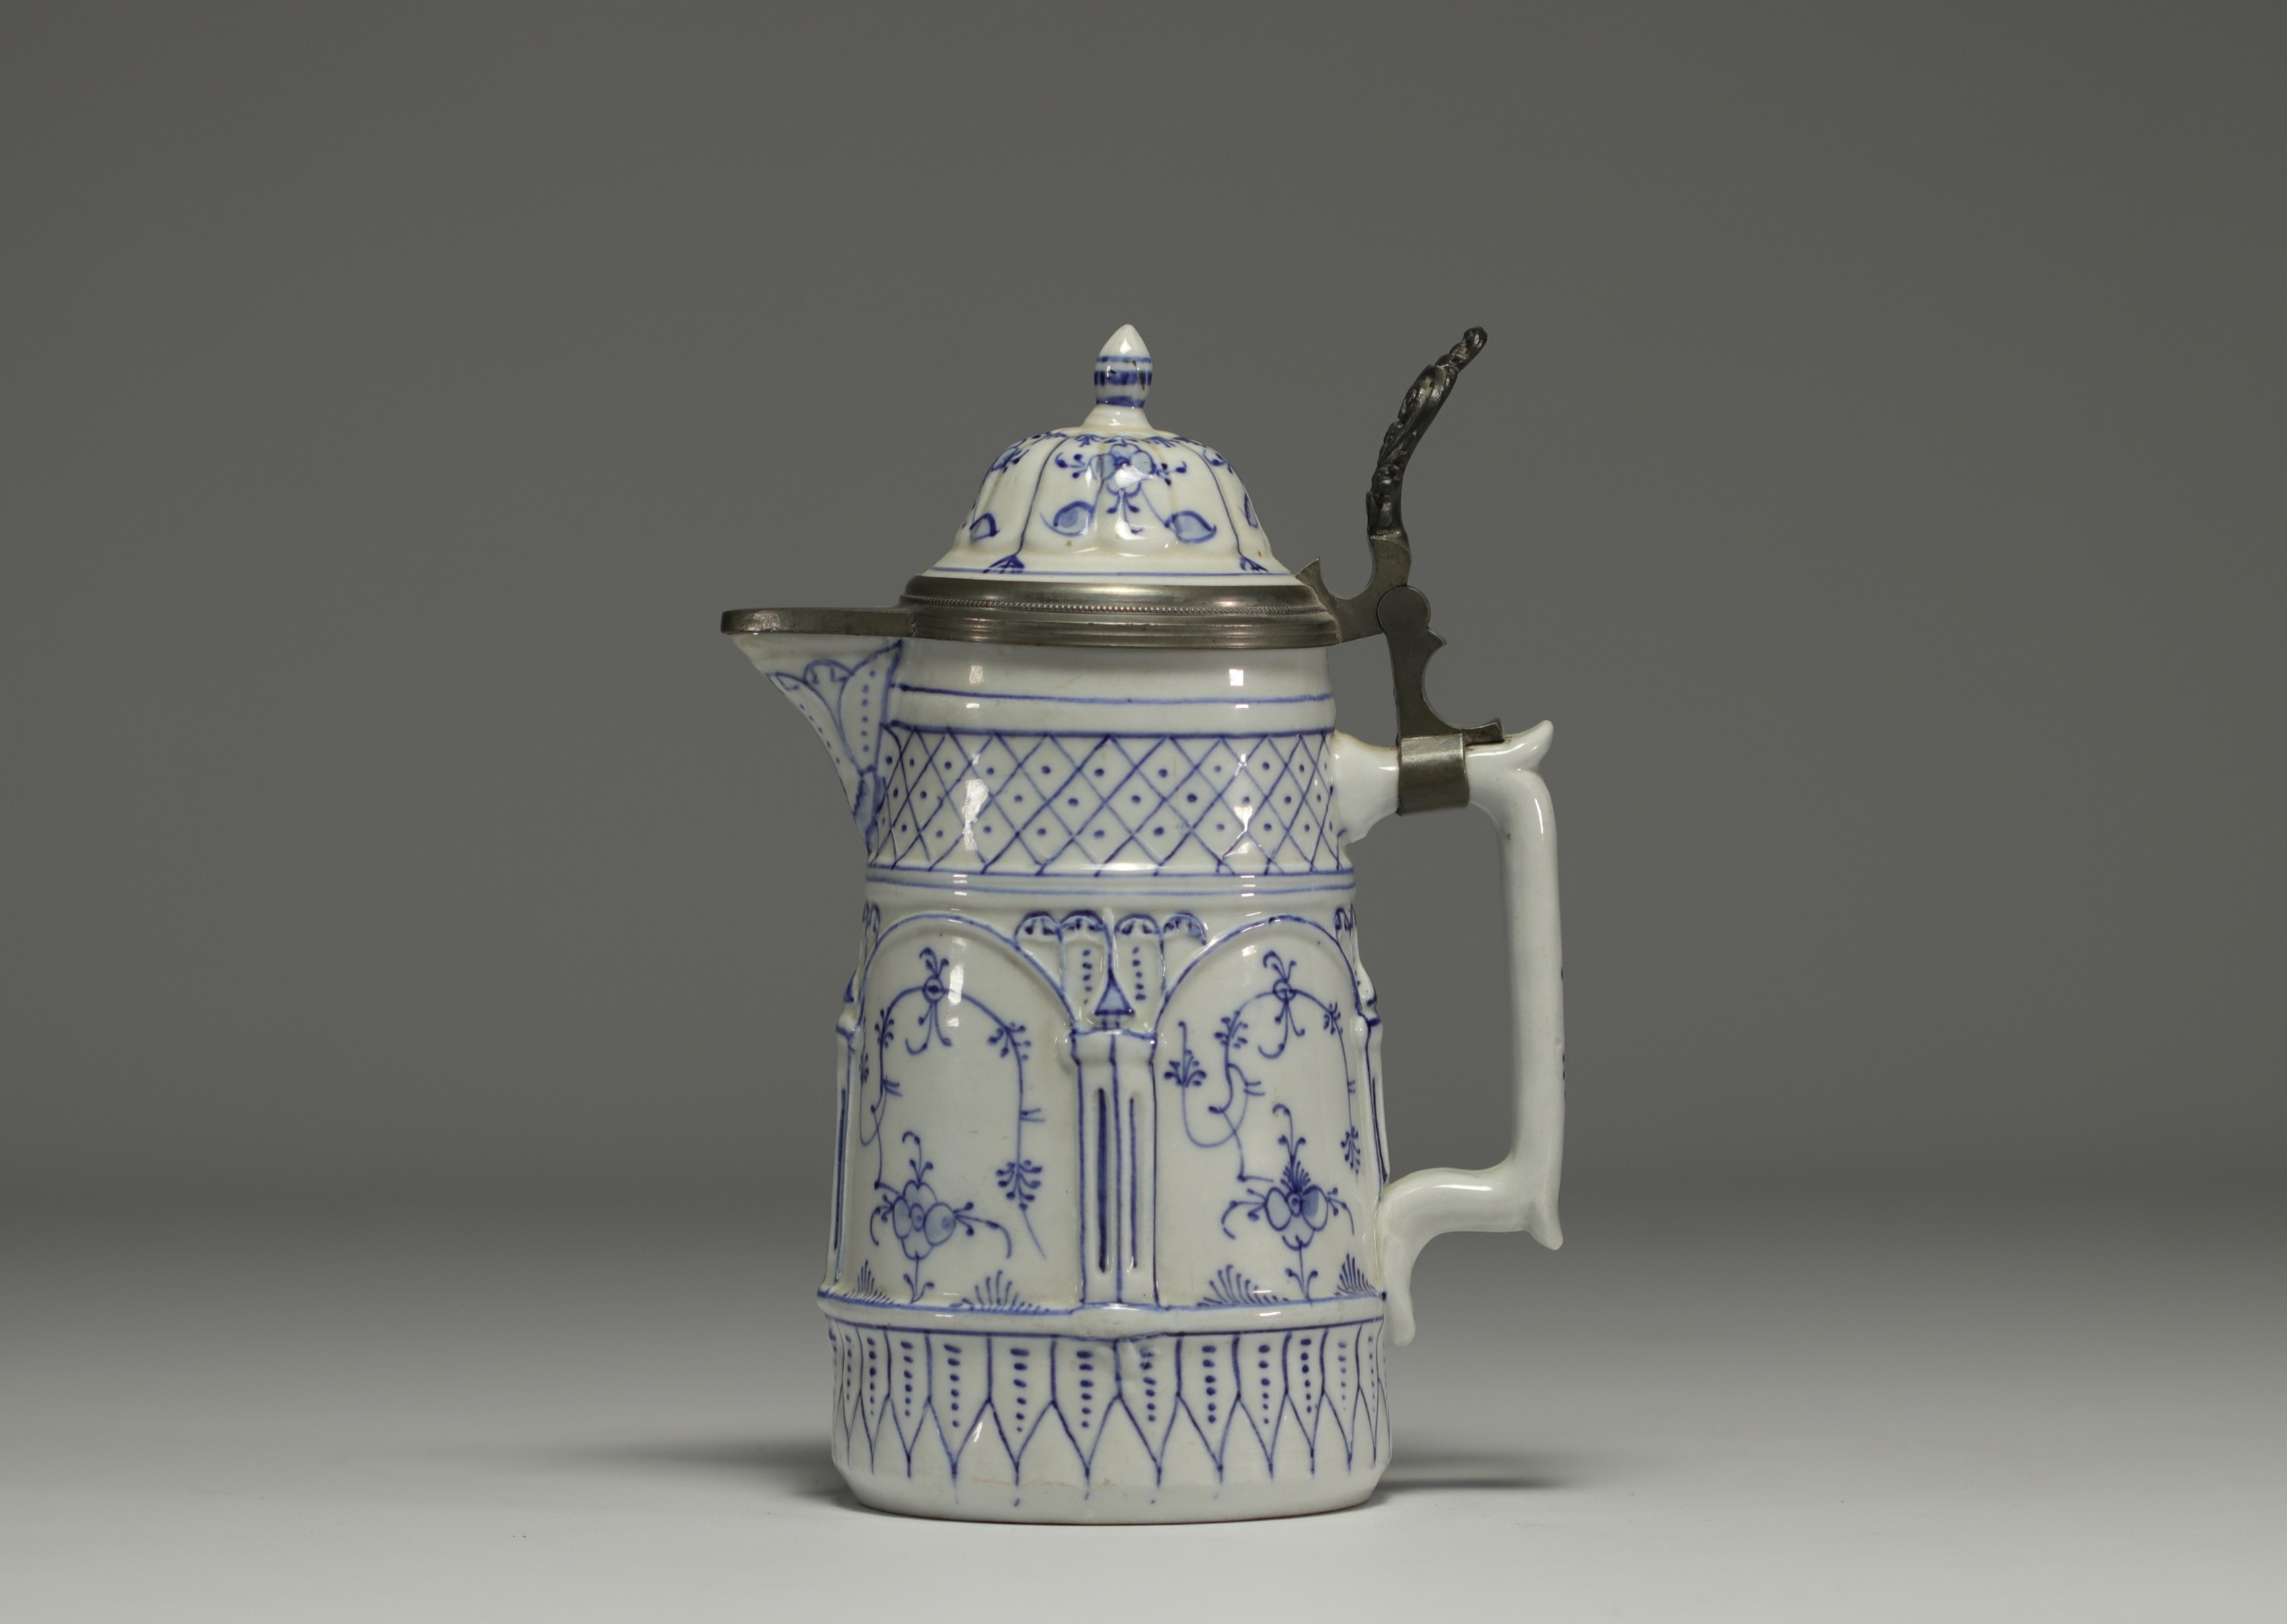 Rauenstein porcelain jug with white and blue decoration, pewter frame, 19th century. - Image 2 of 3